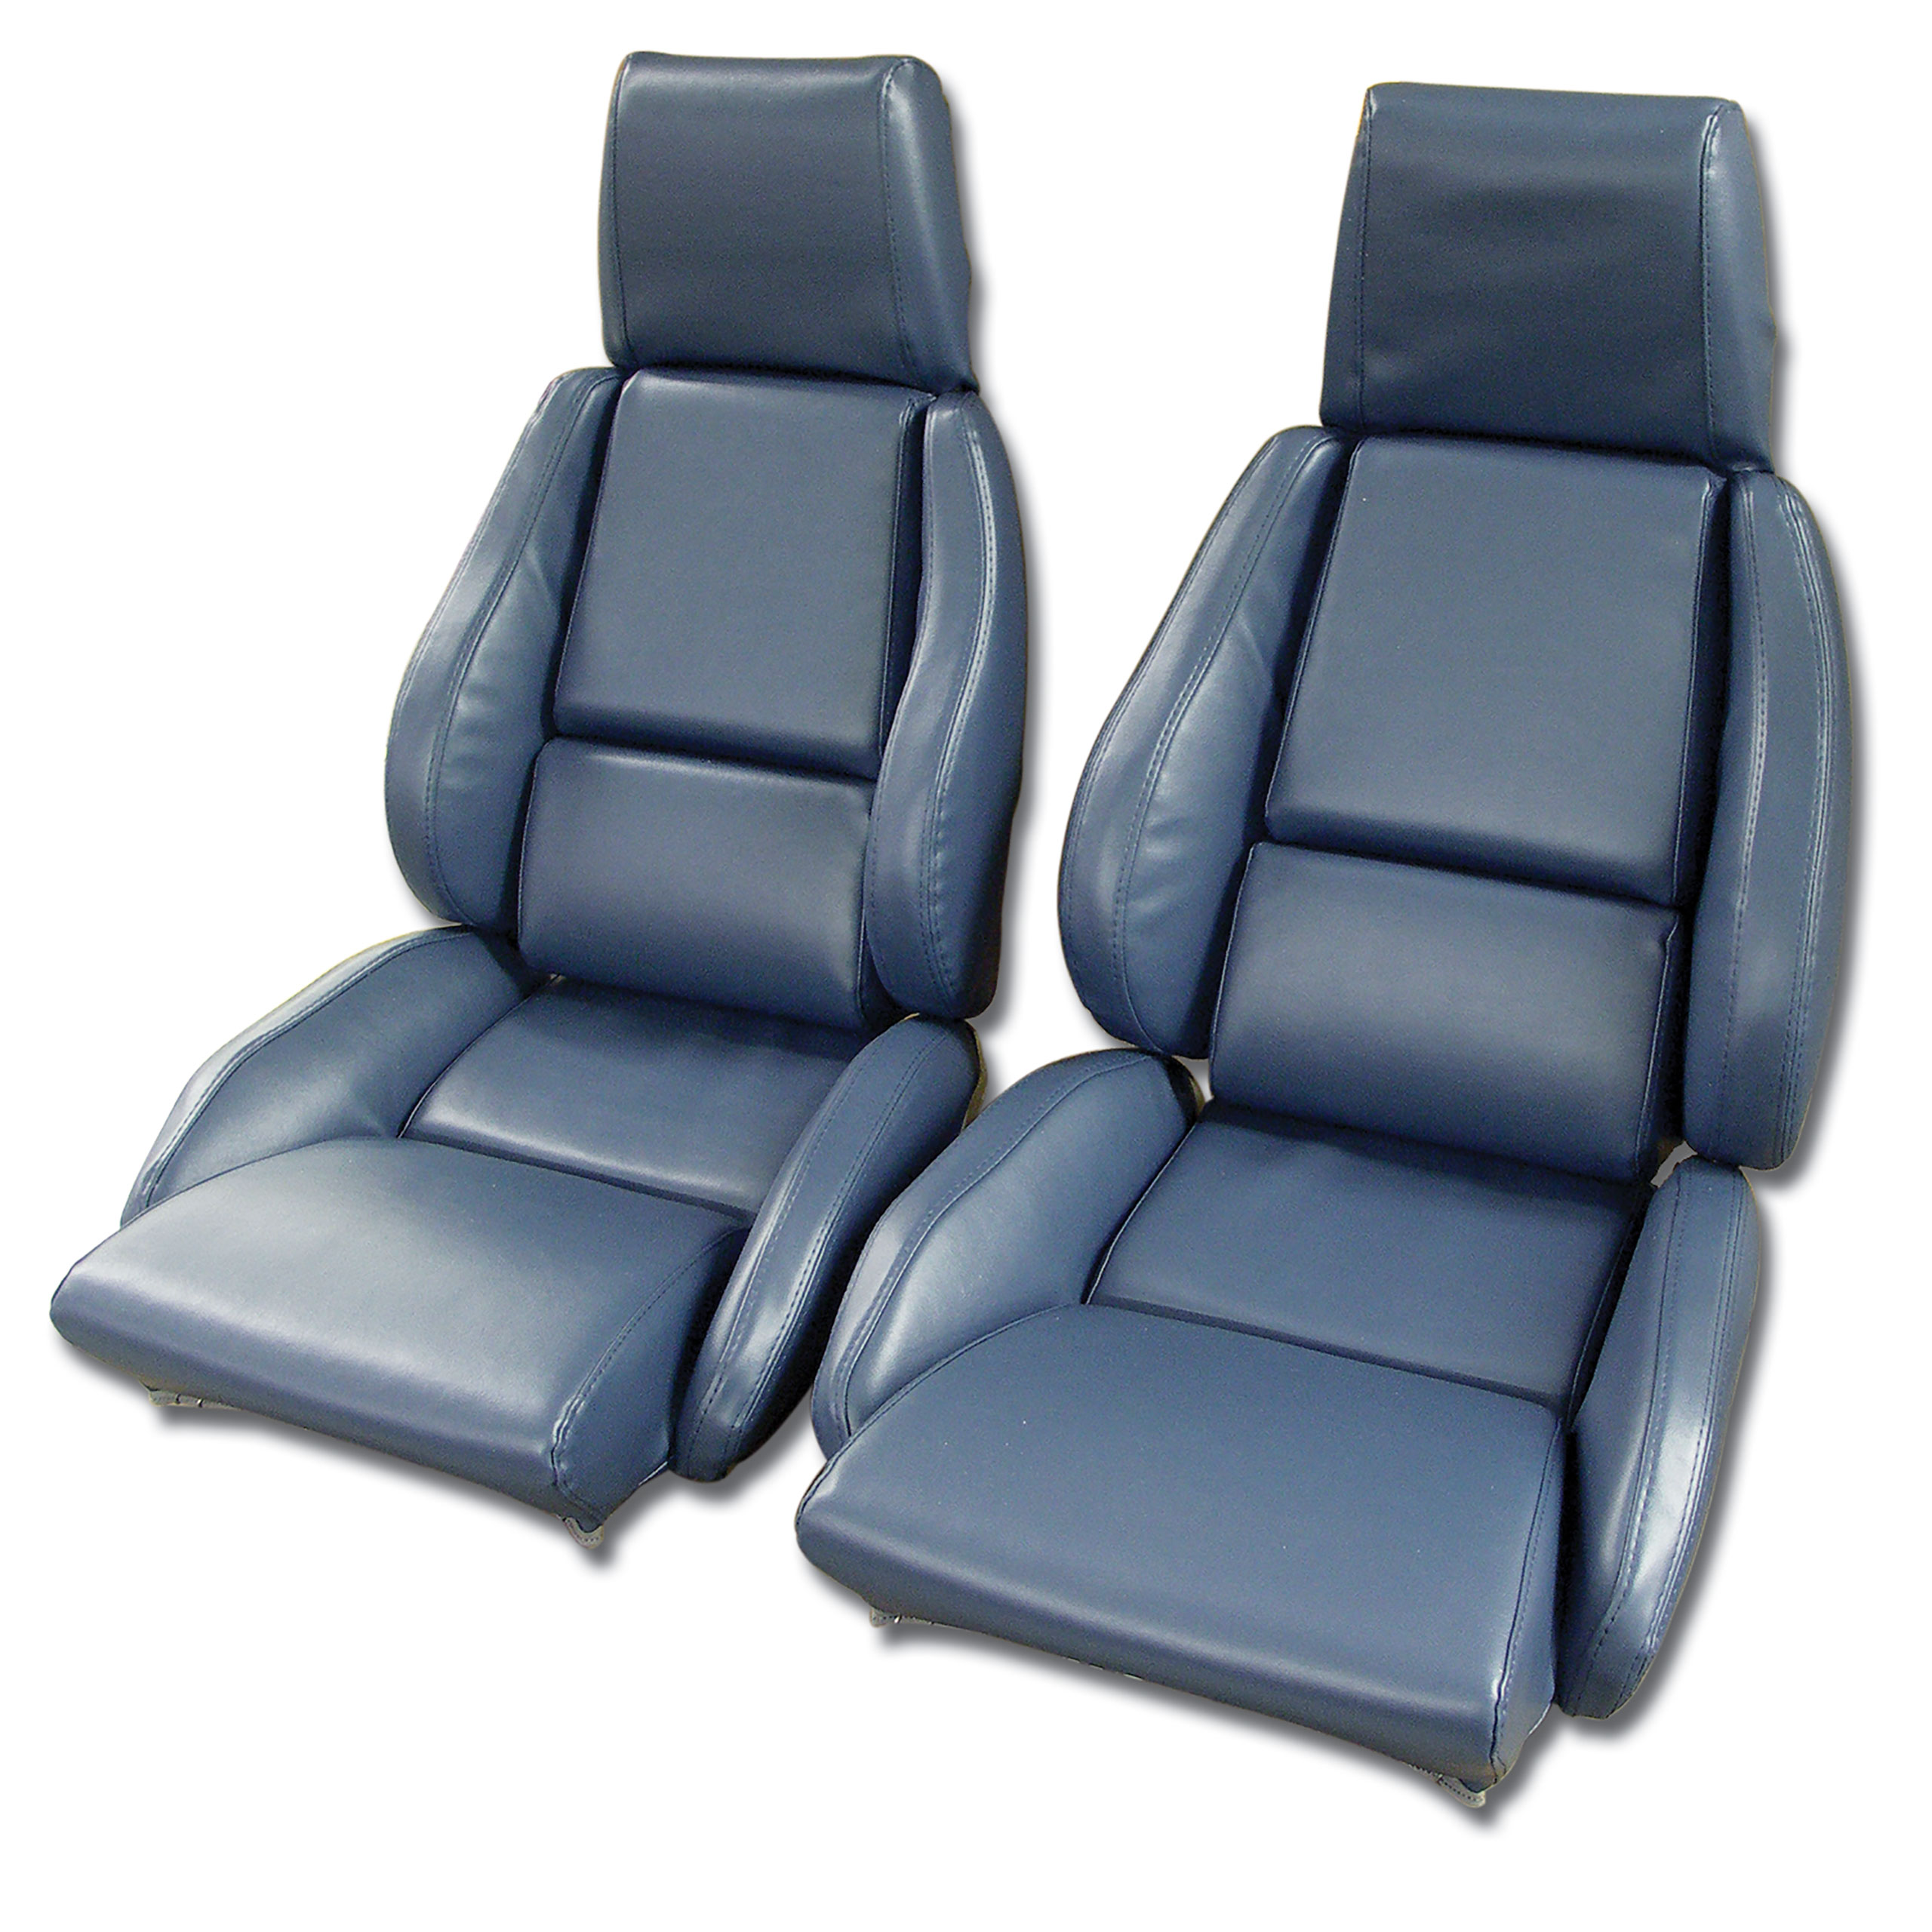 84-85 Corvette C4 468970 OE Style Leather-Like Sport Seat Covers W/O Perforated Inserts Blue CA-468870 